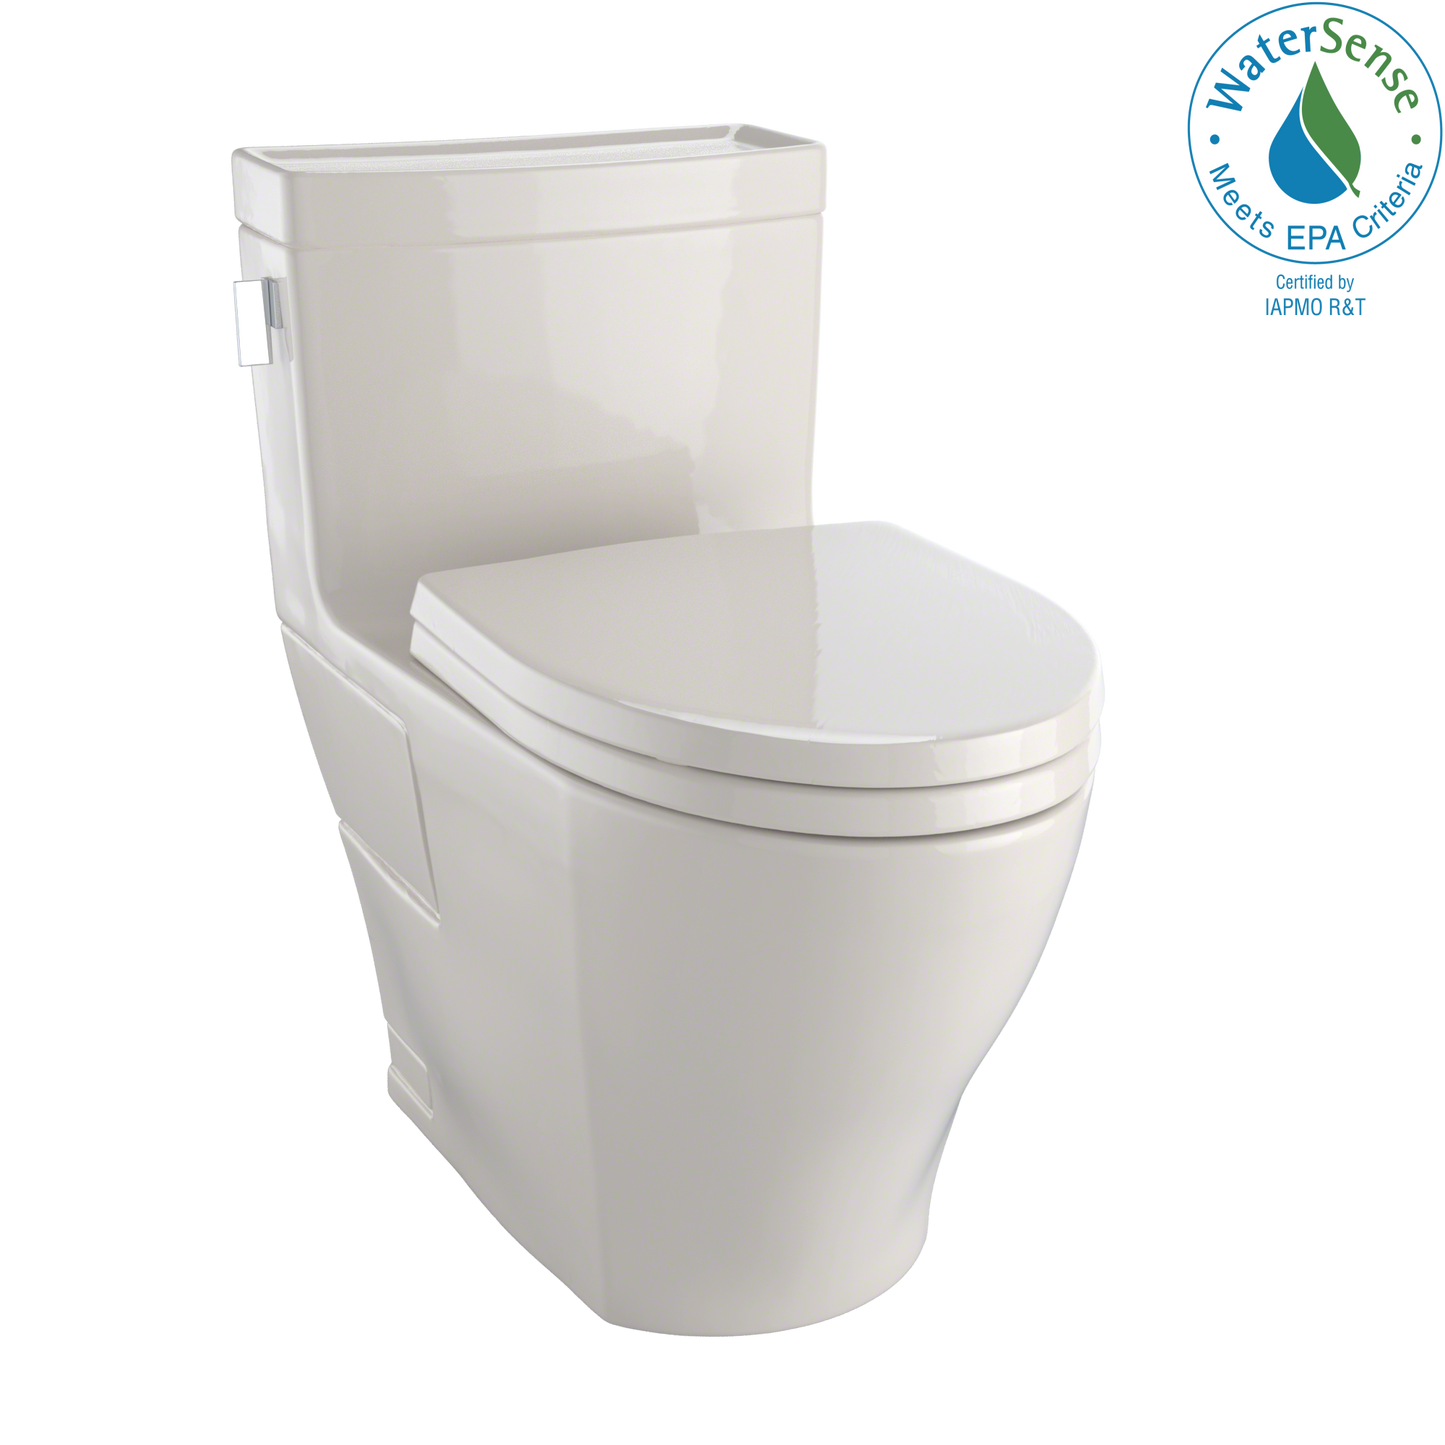 TOTO Legato WASHLET+ One-Piece Elongated 1.28 GPF Universal Height Skirted Toilet with CEFIONTECT - MS624124CEFG